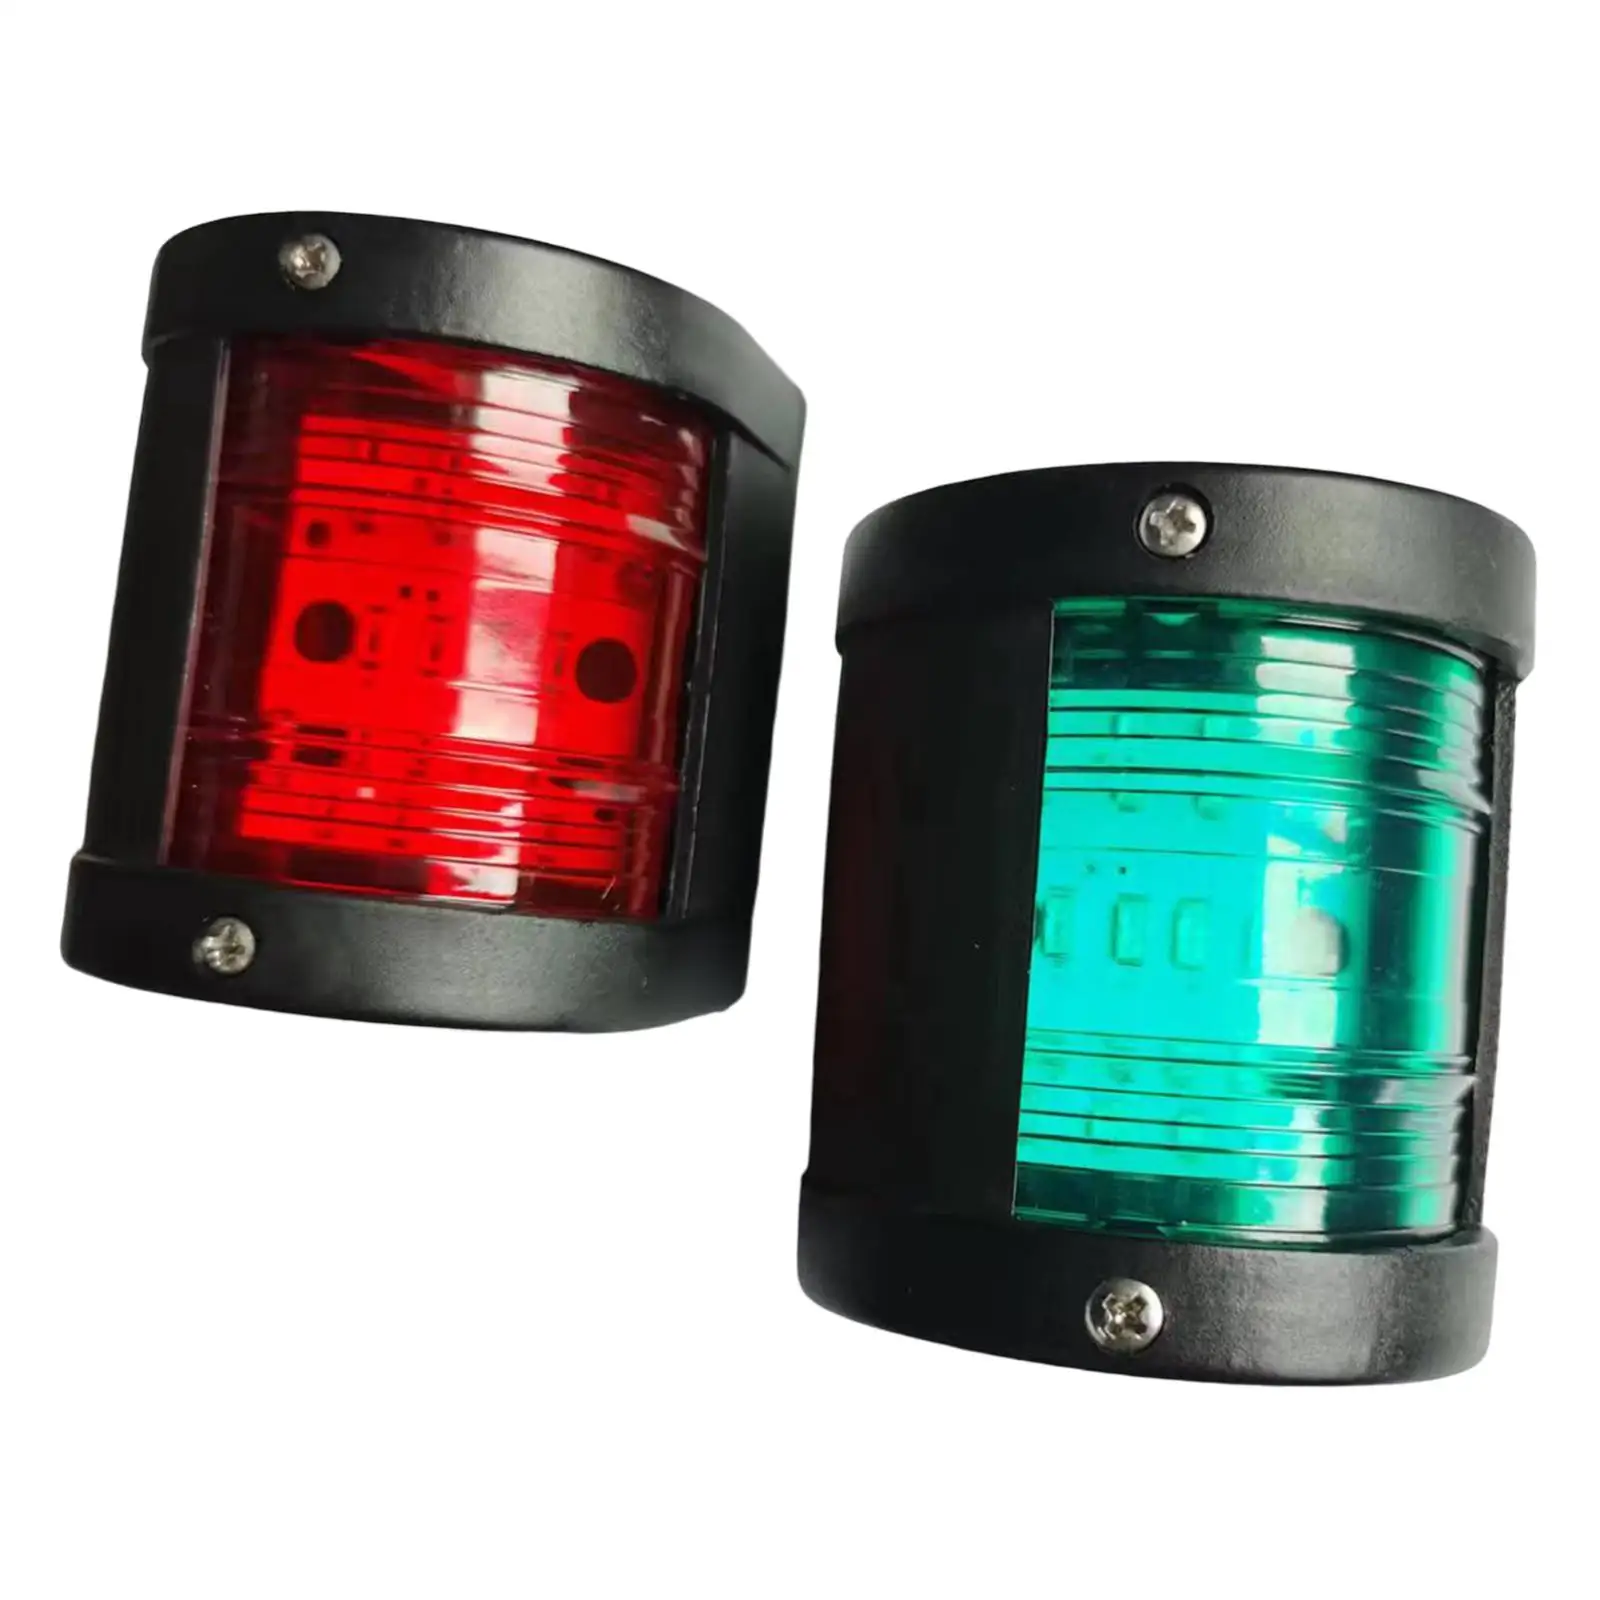 2Pcs Boat Navigation Light PP Water Resistant LED Stern Navigation Lights for Boats for Boat Marine Boat Yacht Replacement